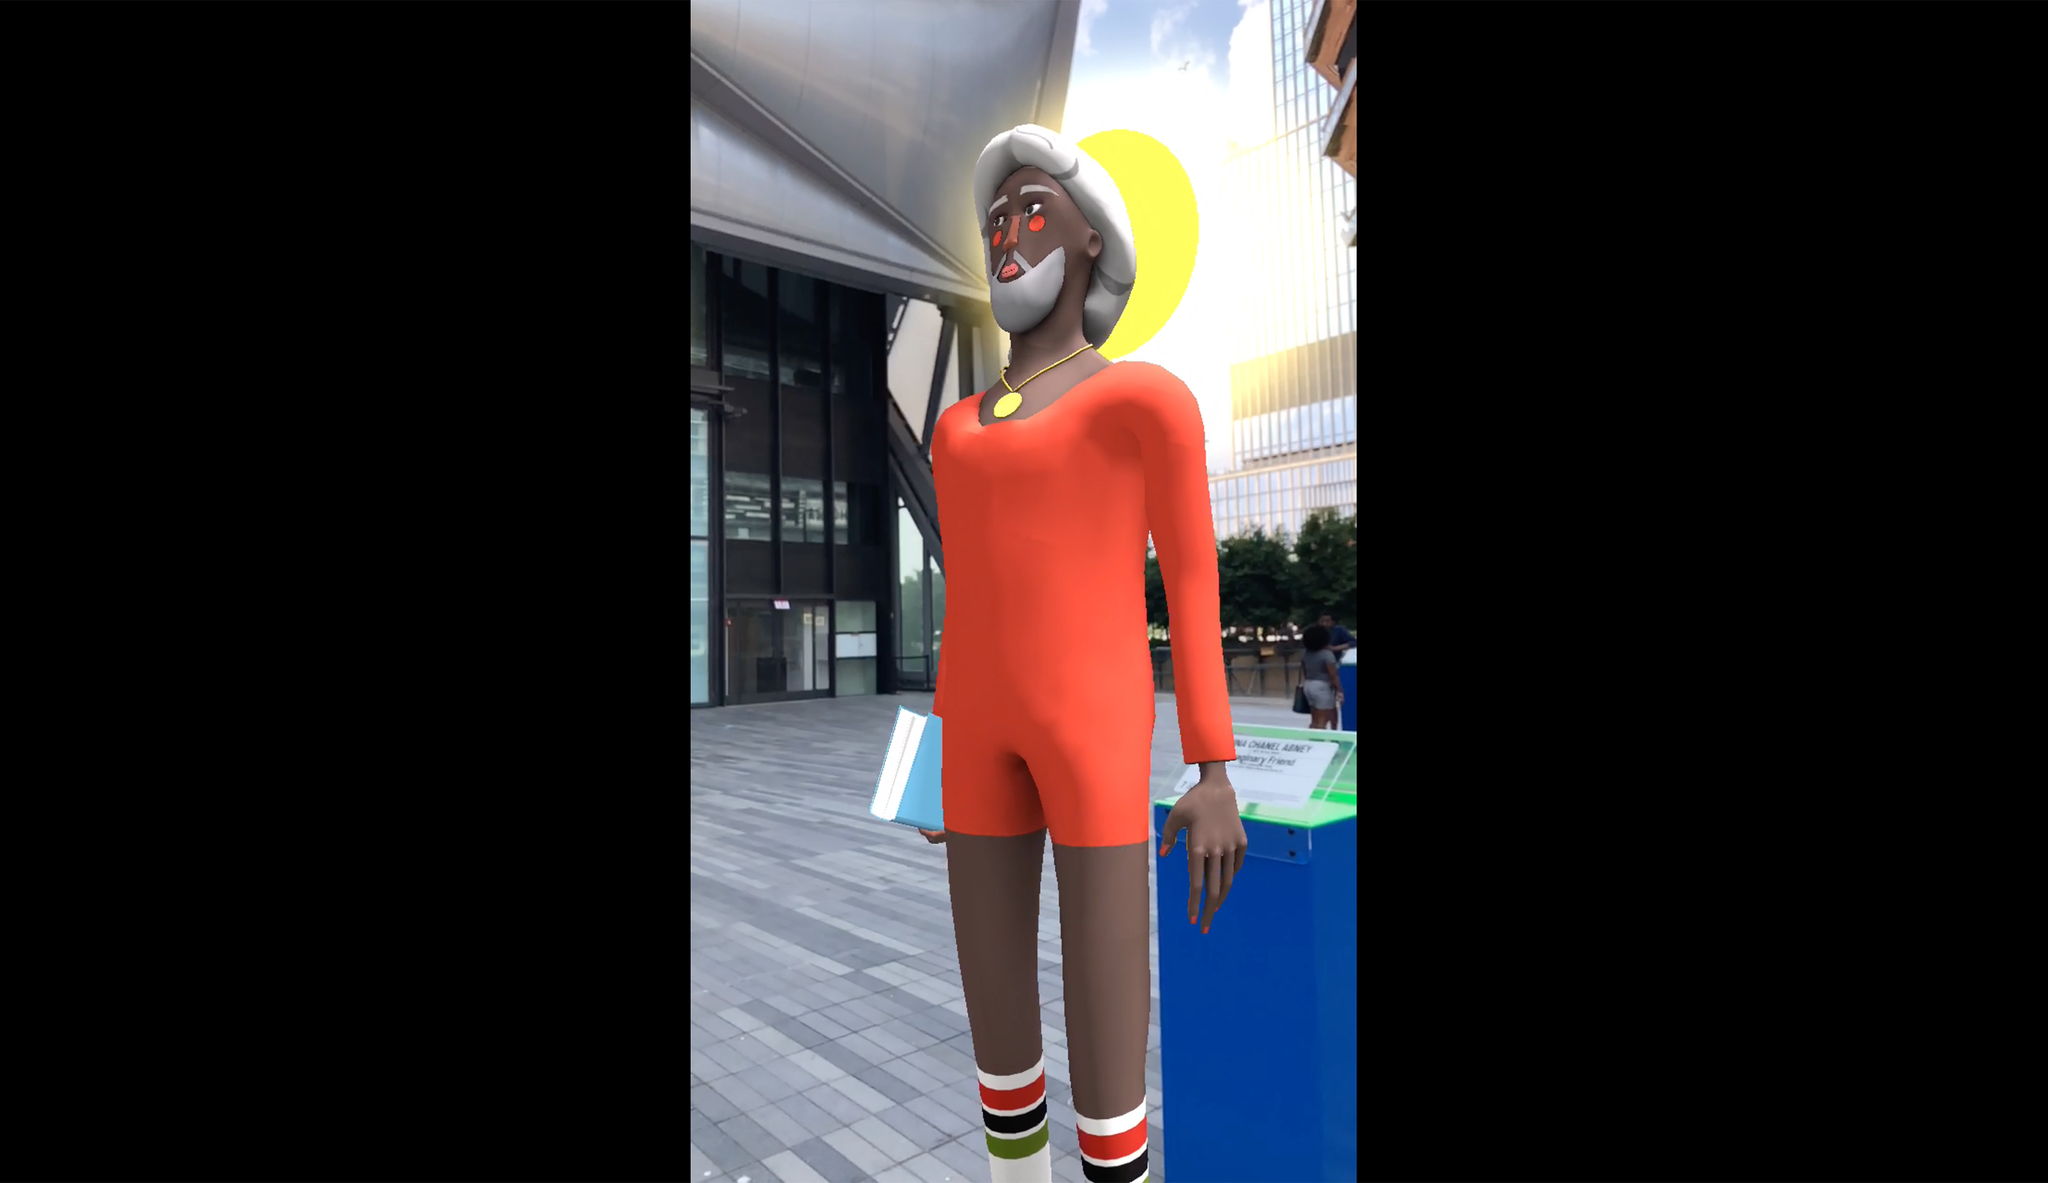 An augmented reality avatar of a person in a red shorts onesie, high top black sneakers, and knee-high athletic socks appears on an outdoor plaza